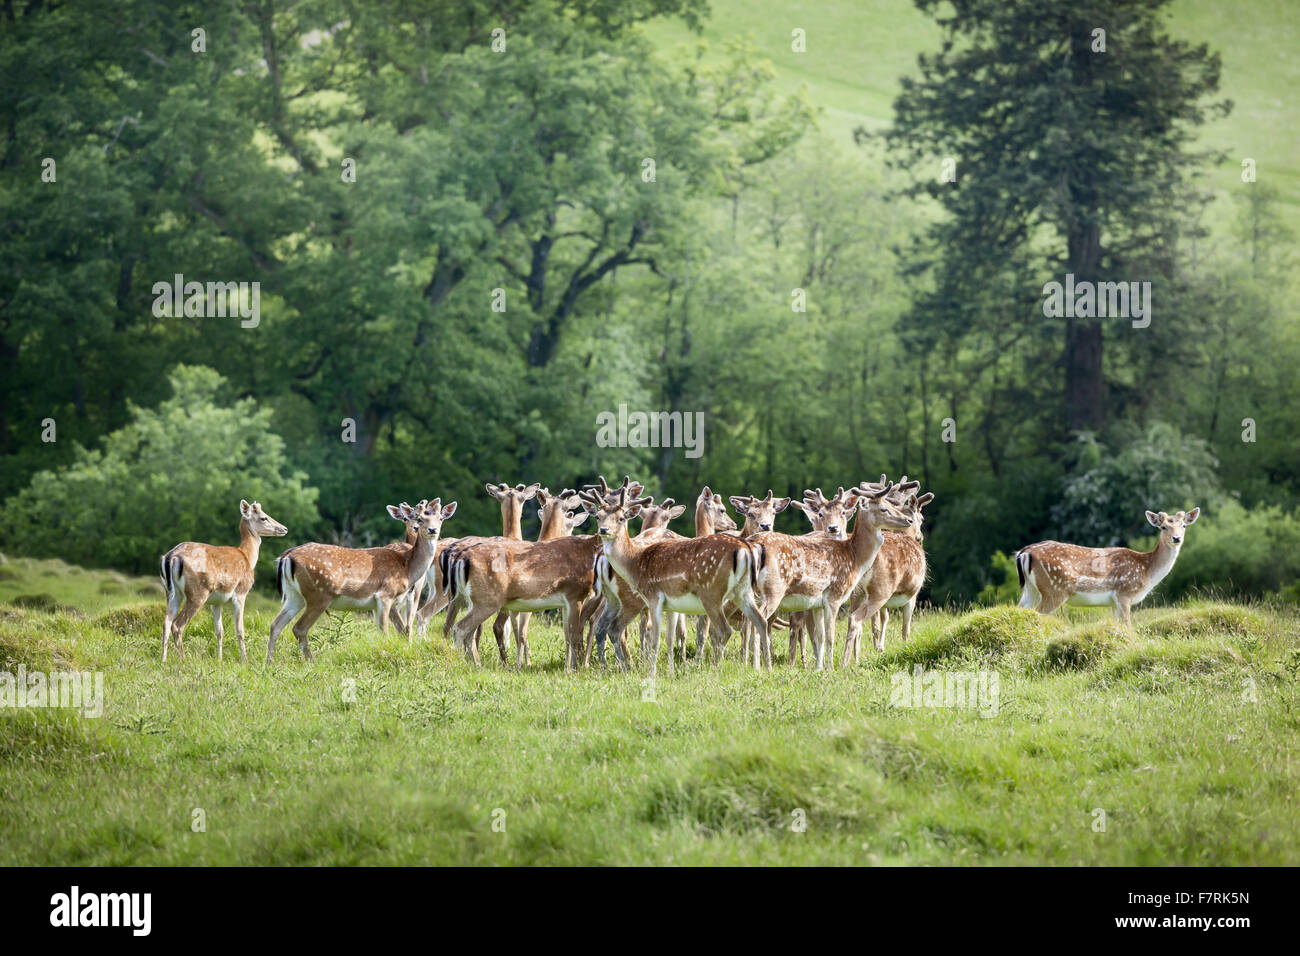 Fallow deer in the Deer Park at Dinefwr, Carmarthenshire, Wales. Dinefwr is a National Nature Reserve, historic house and 18th-century landscape park, enclosing a medieval deer park. Stock Photo